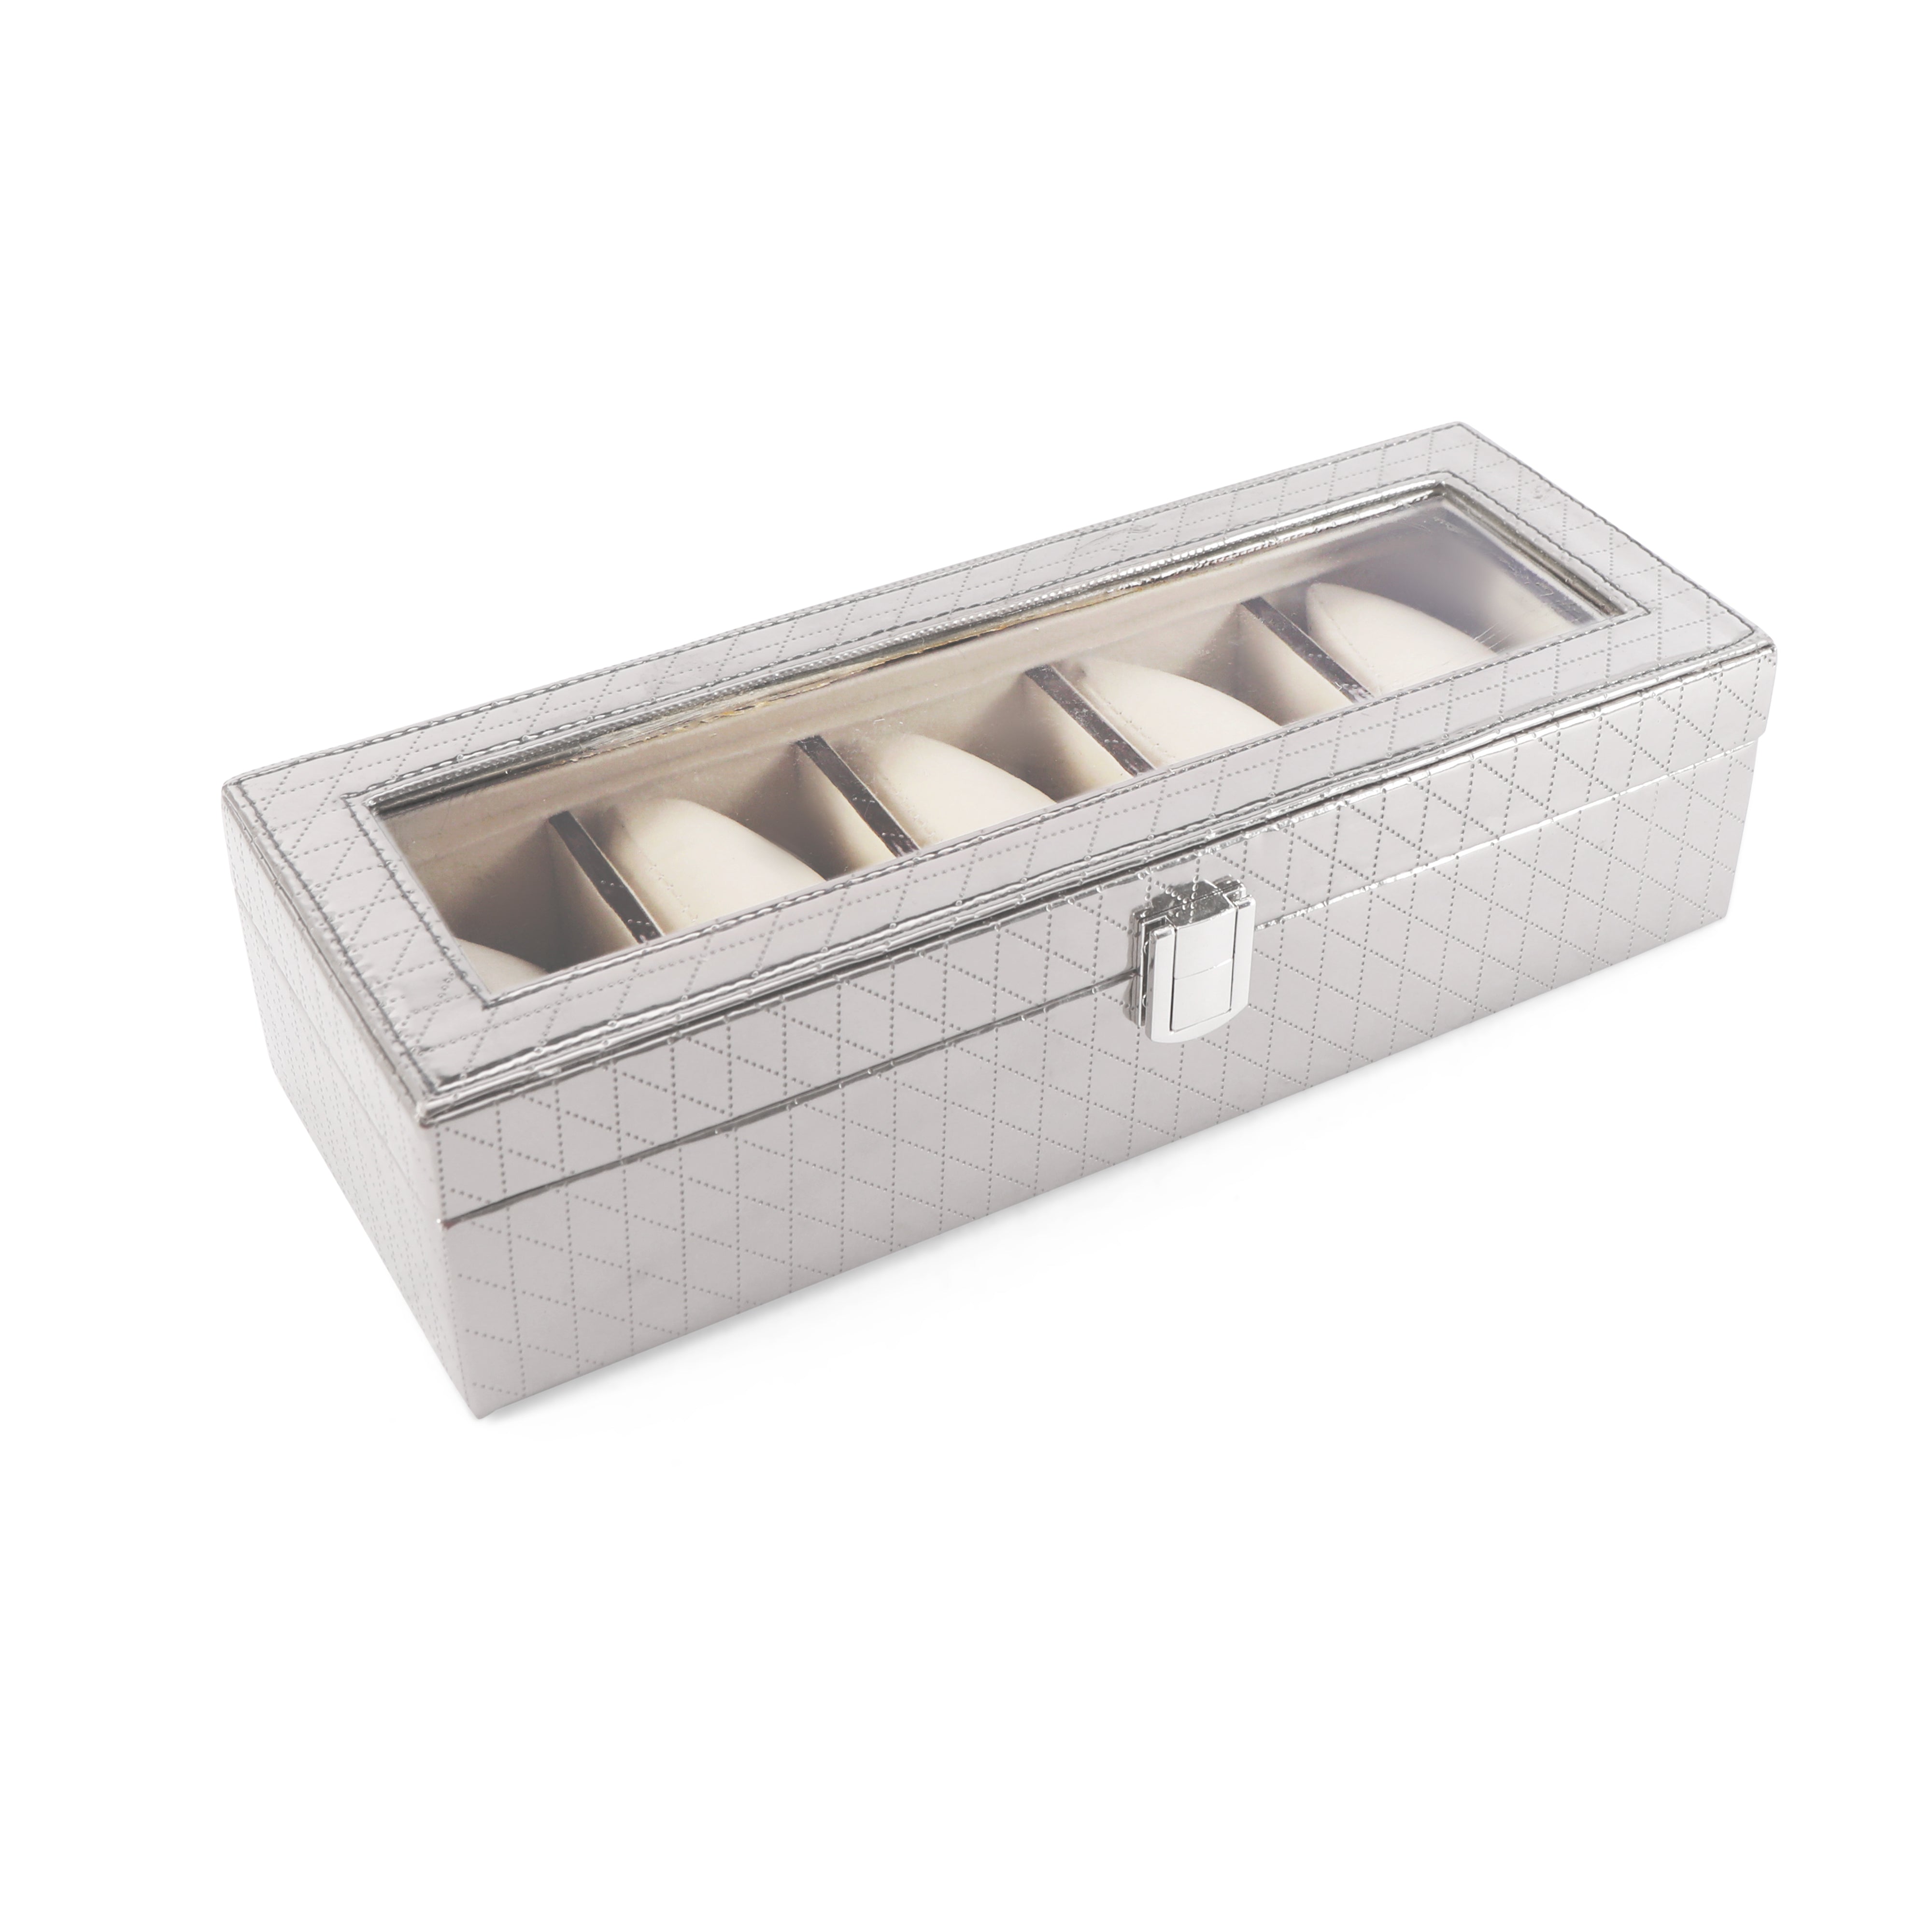 Watchbox 5 Partition - Silver Watch Box 4- The Home Co.